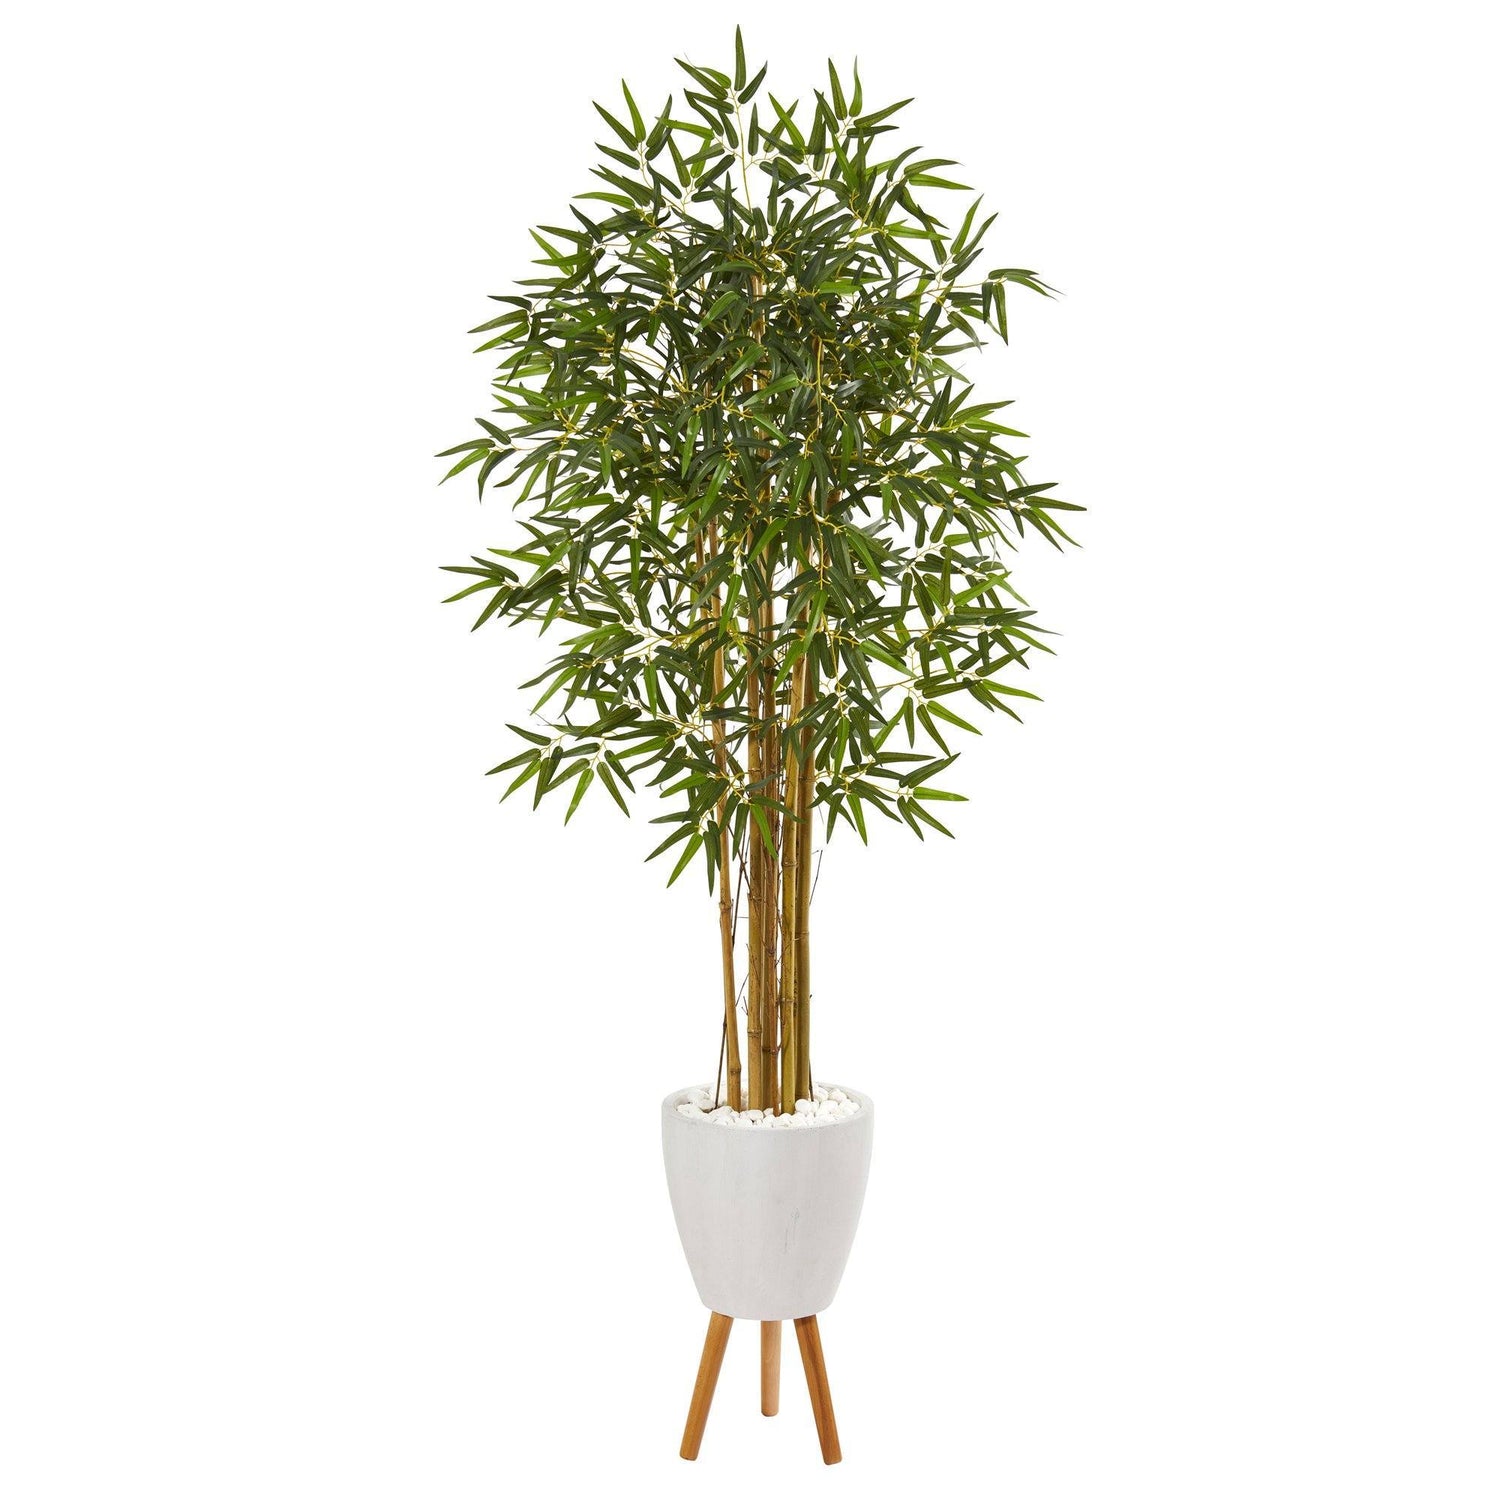 74” Multi Bambusa Bamboo Artificial Tree in White Planter with Stand